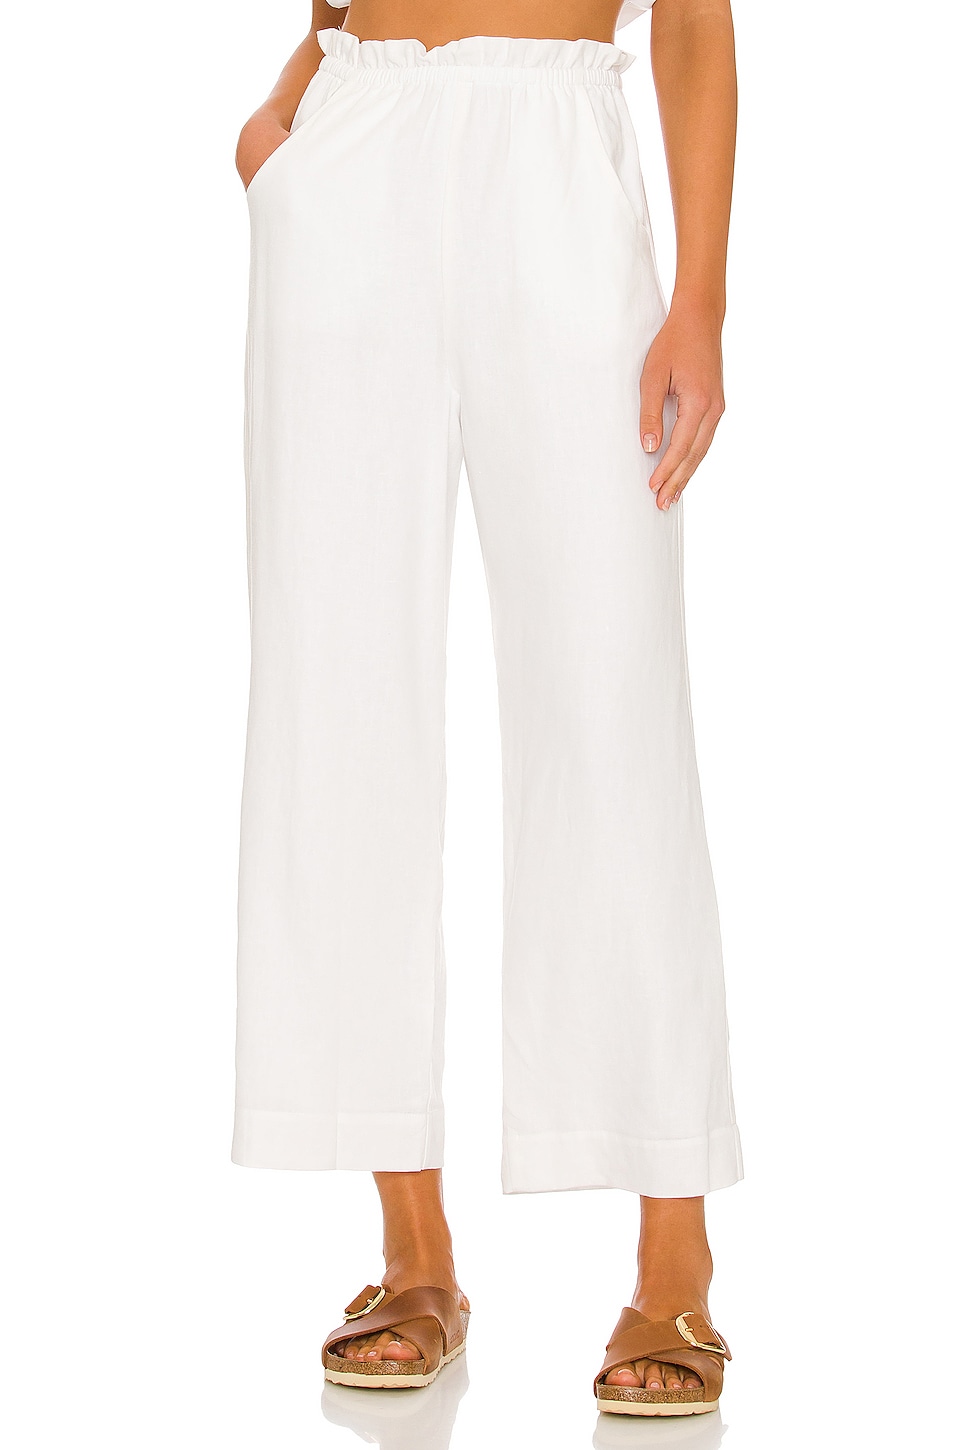 Show Me Your Mumu Peggy Pants in White Linen | REVOLVE